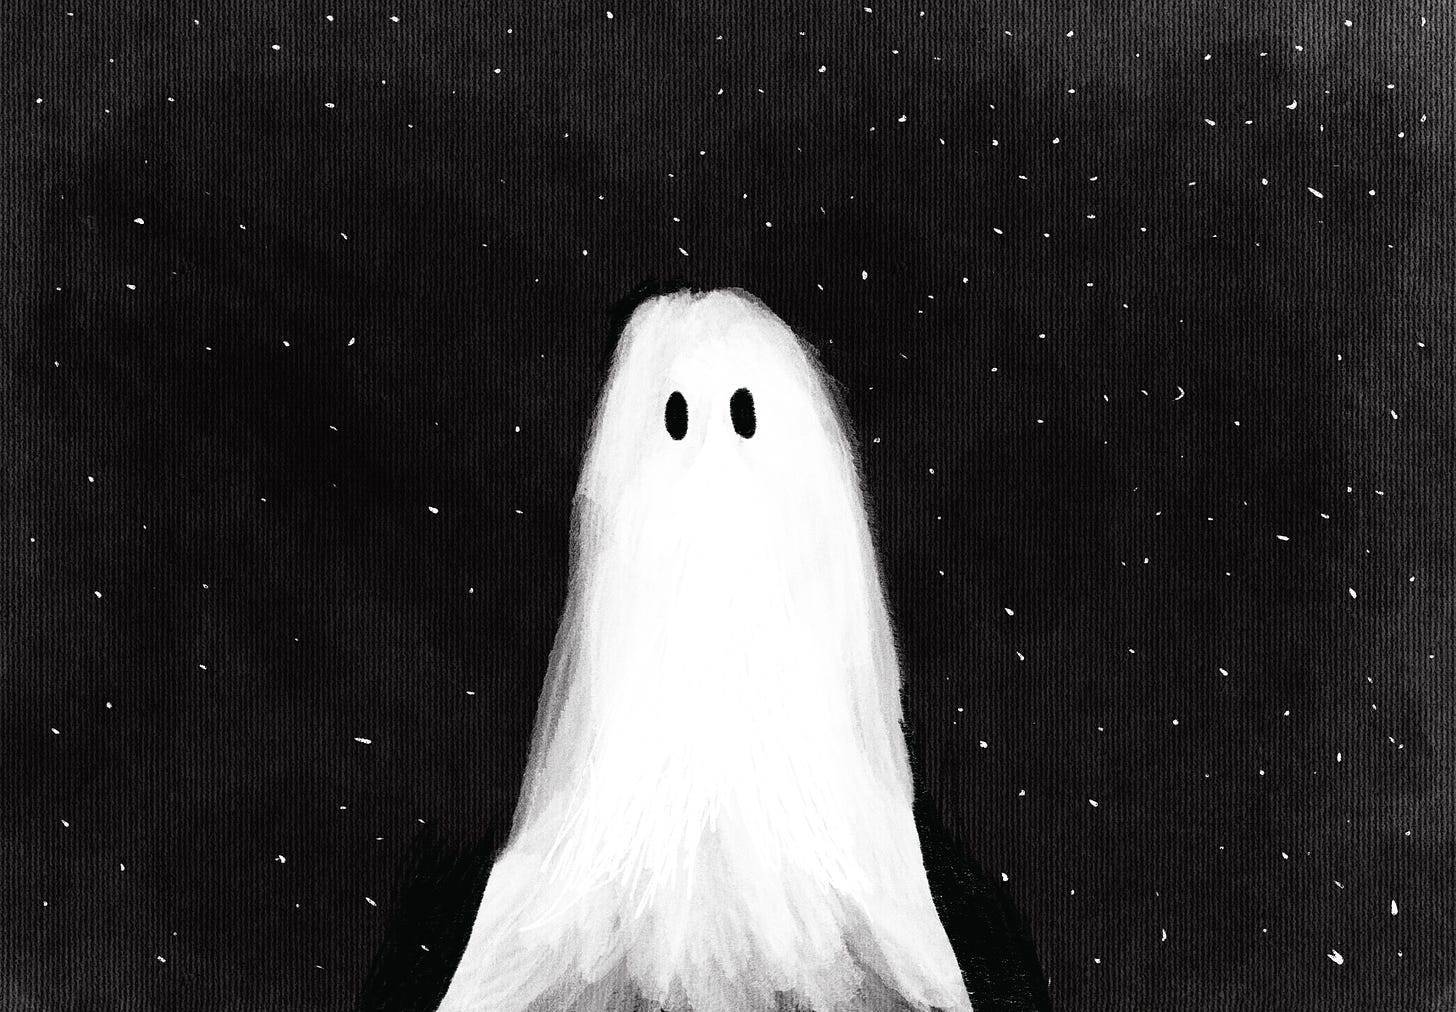 Ghost on a starry black background by Nicola Muthurangu-Hall